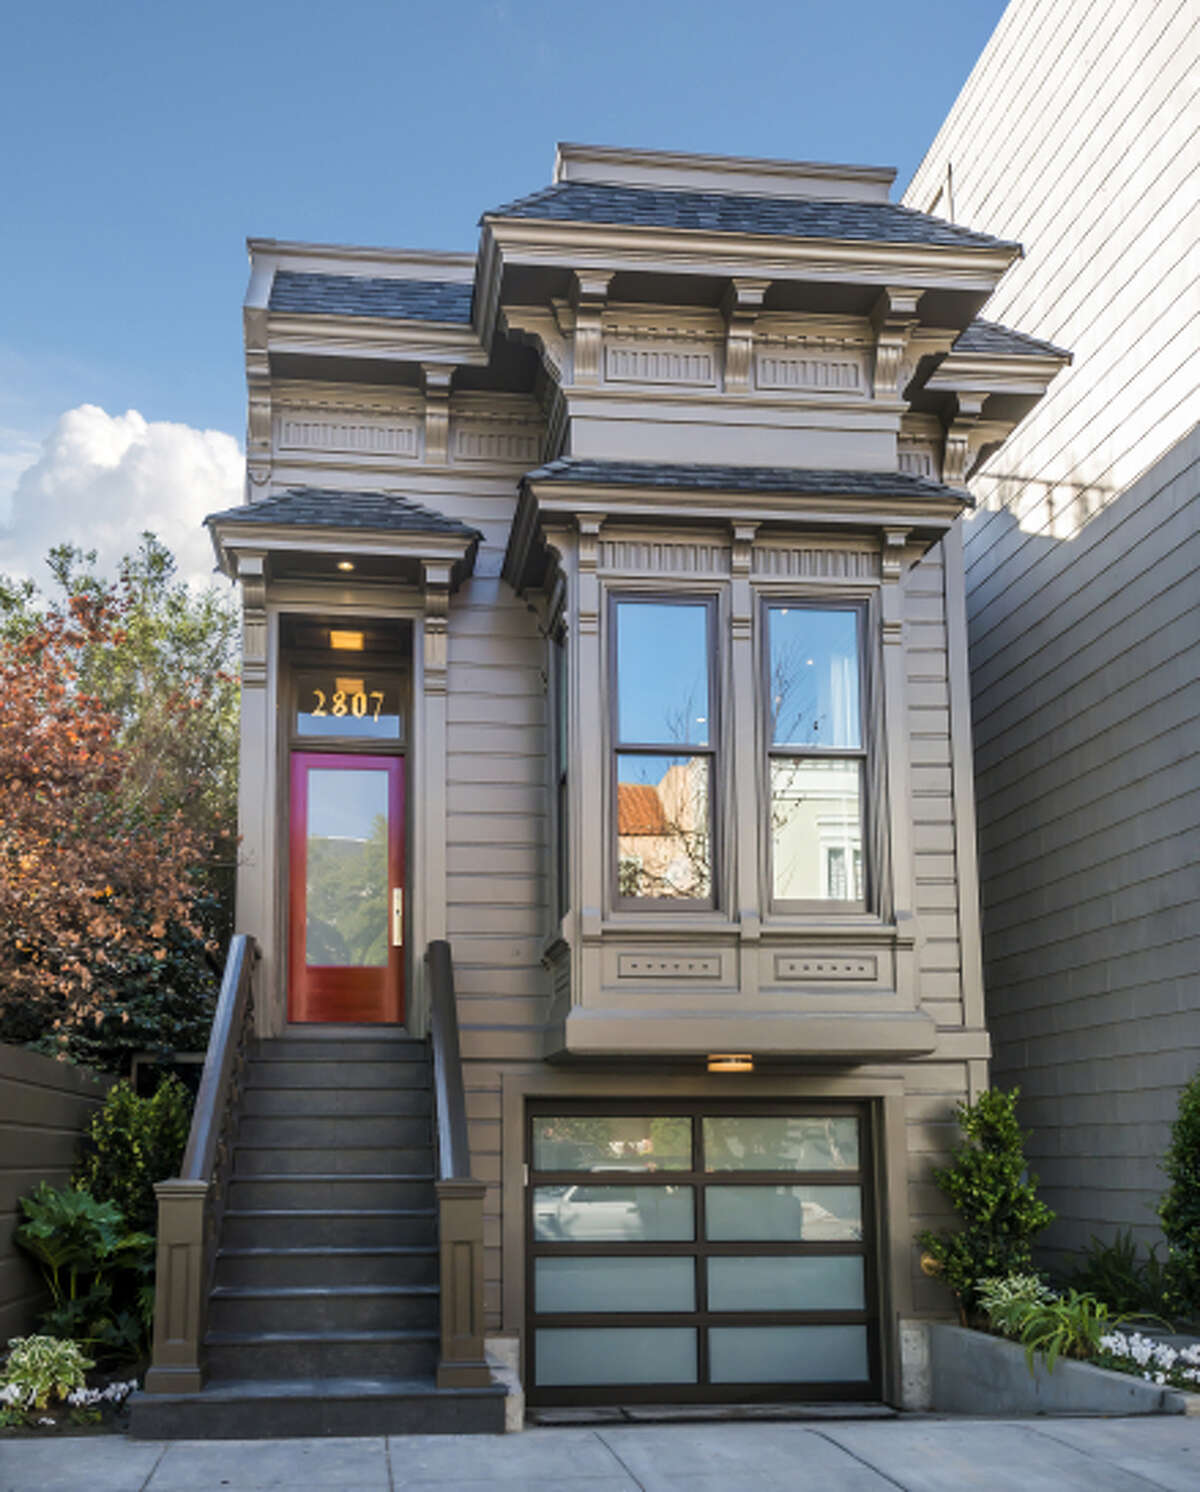 2807 Clay Street in Pacific Heights is available for $6.5 million.Click here to check out more listings in Pac Heights »